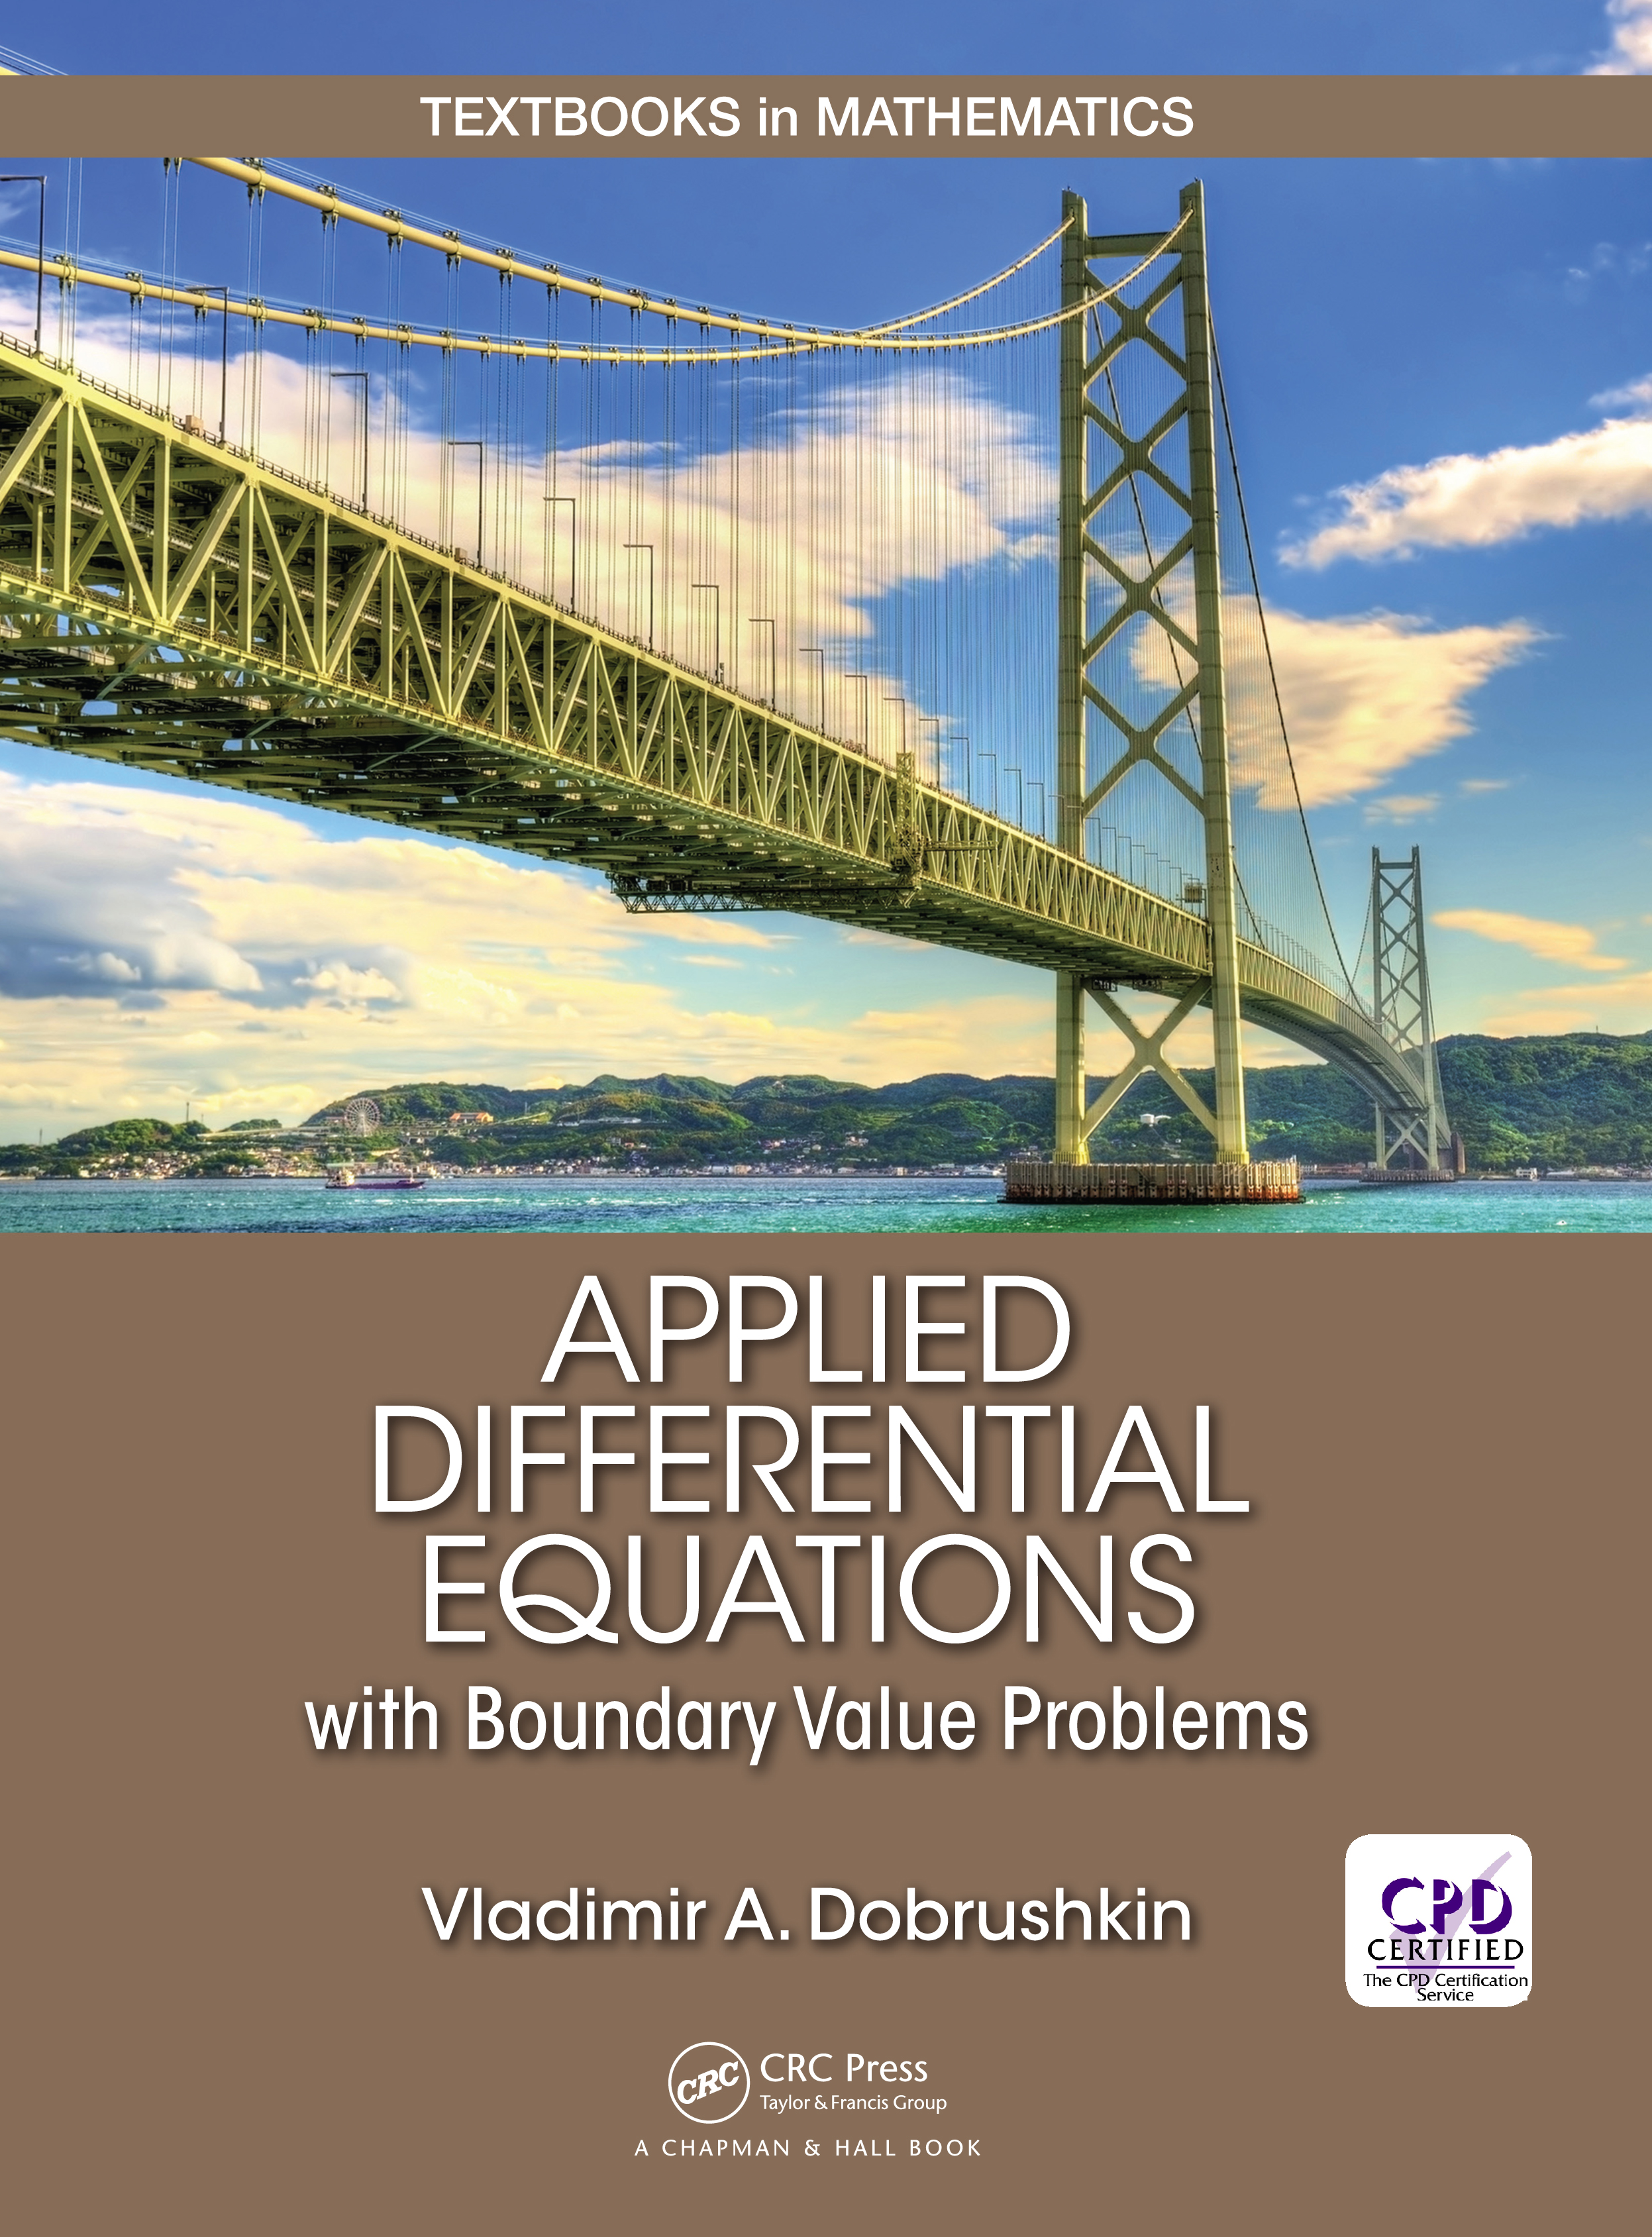 Applied problems. Non-homogeneous Boundary value problems and applications. Elementary Differential equations and Boundary value problems, Boyce and DIPRIMA, 10th ed., 2010.